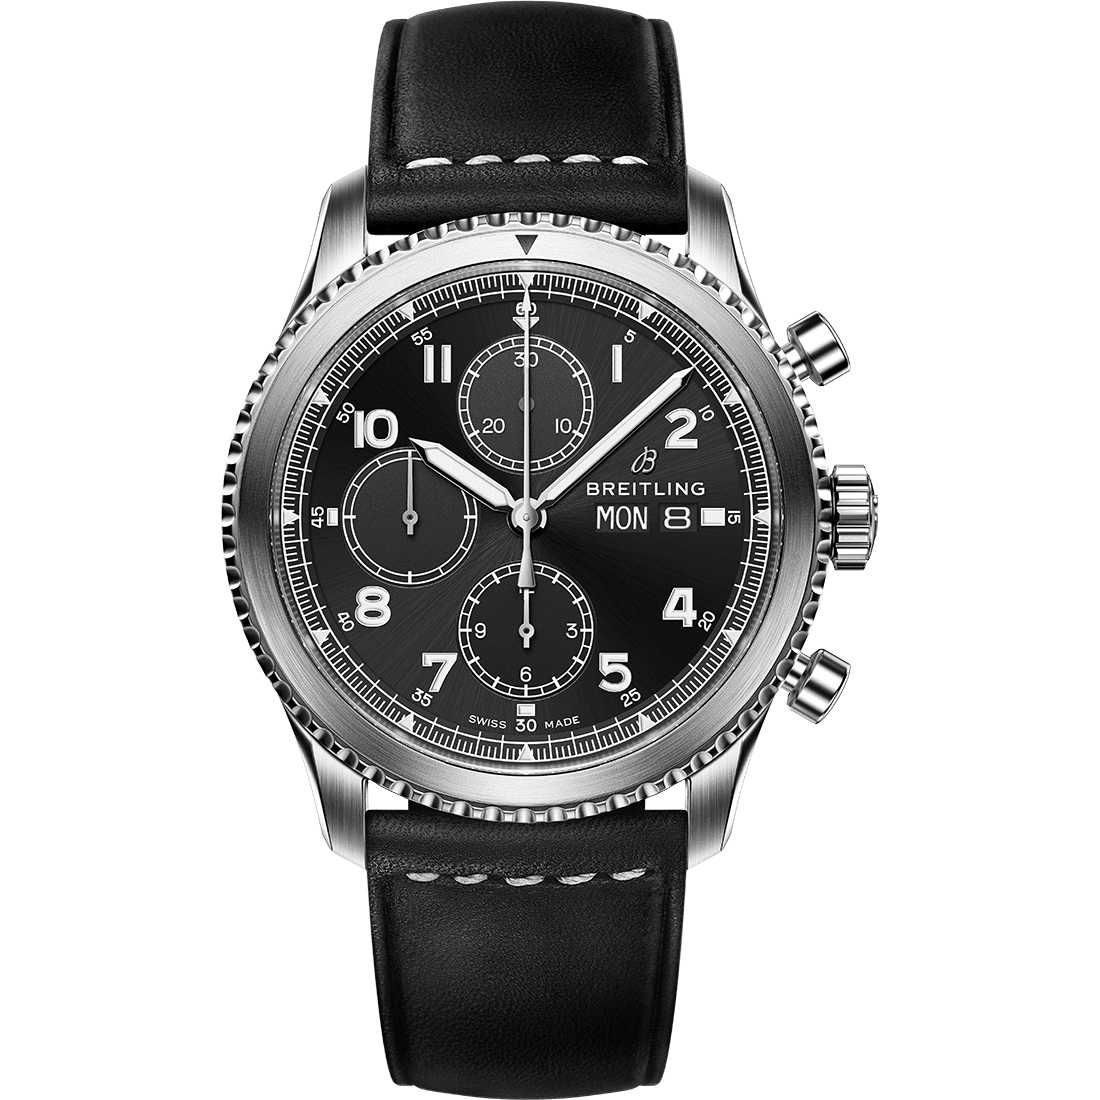 navitimer-8-chronograph-with-black-dial-and-black-leather-strap